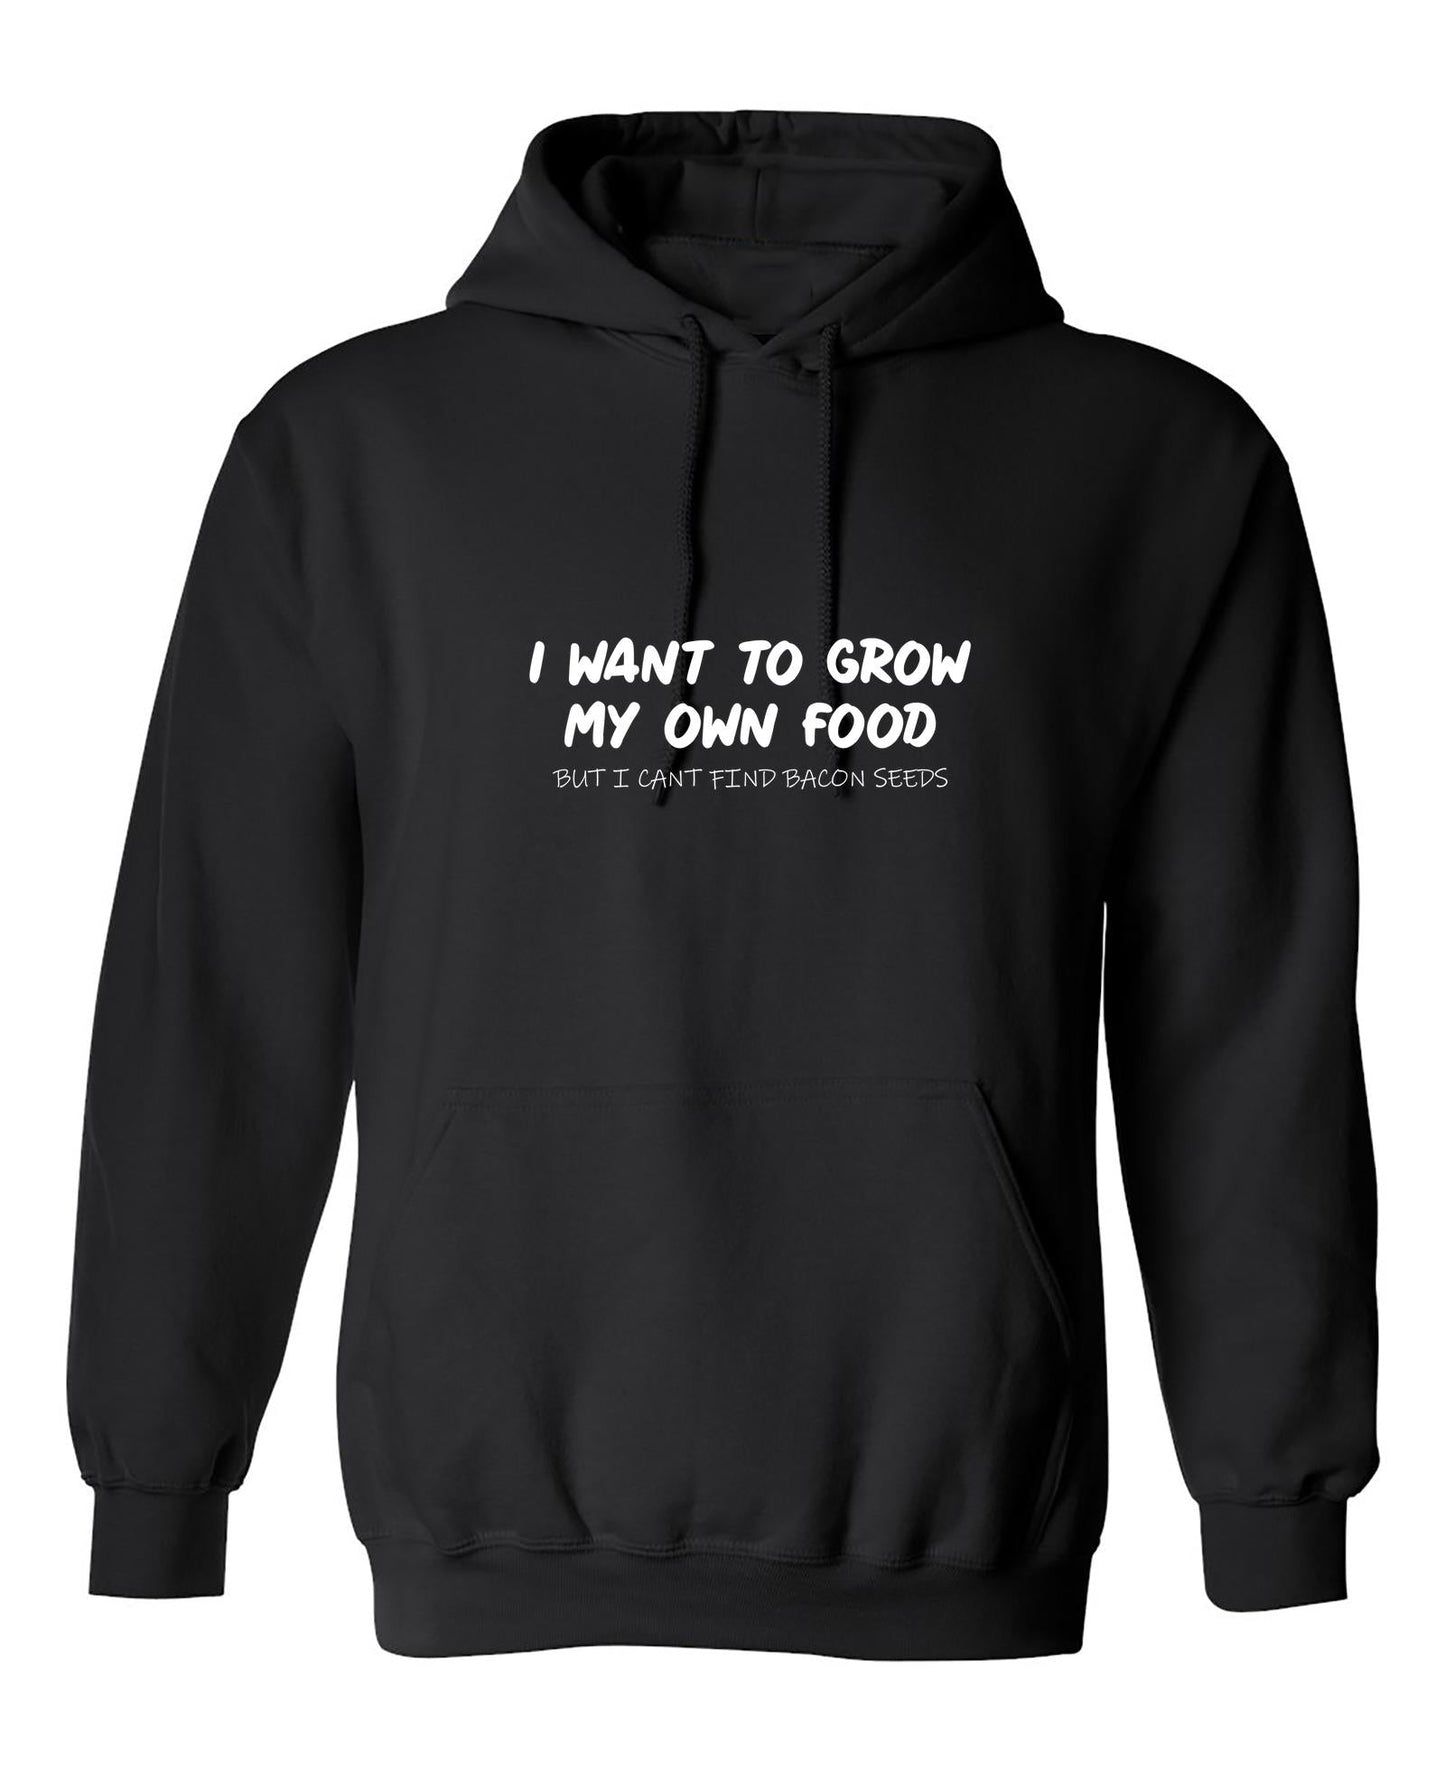 Funny T-Shirts design "I Want to Grow My Own Food"